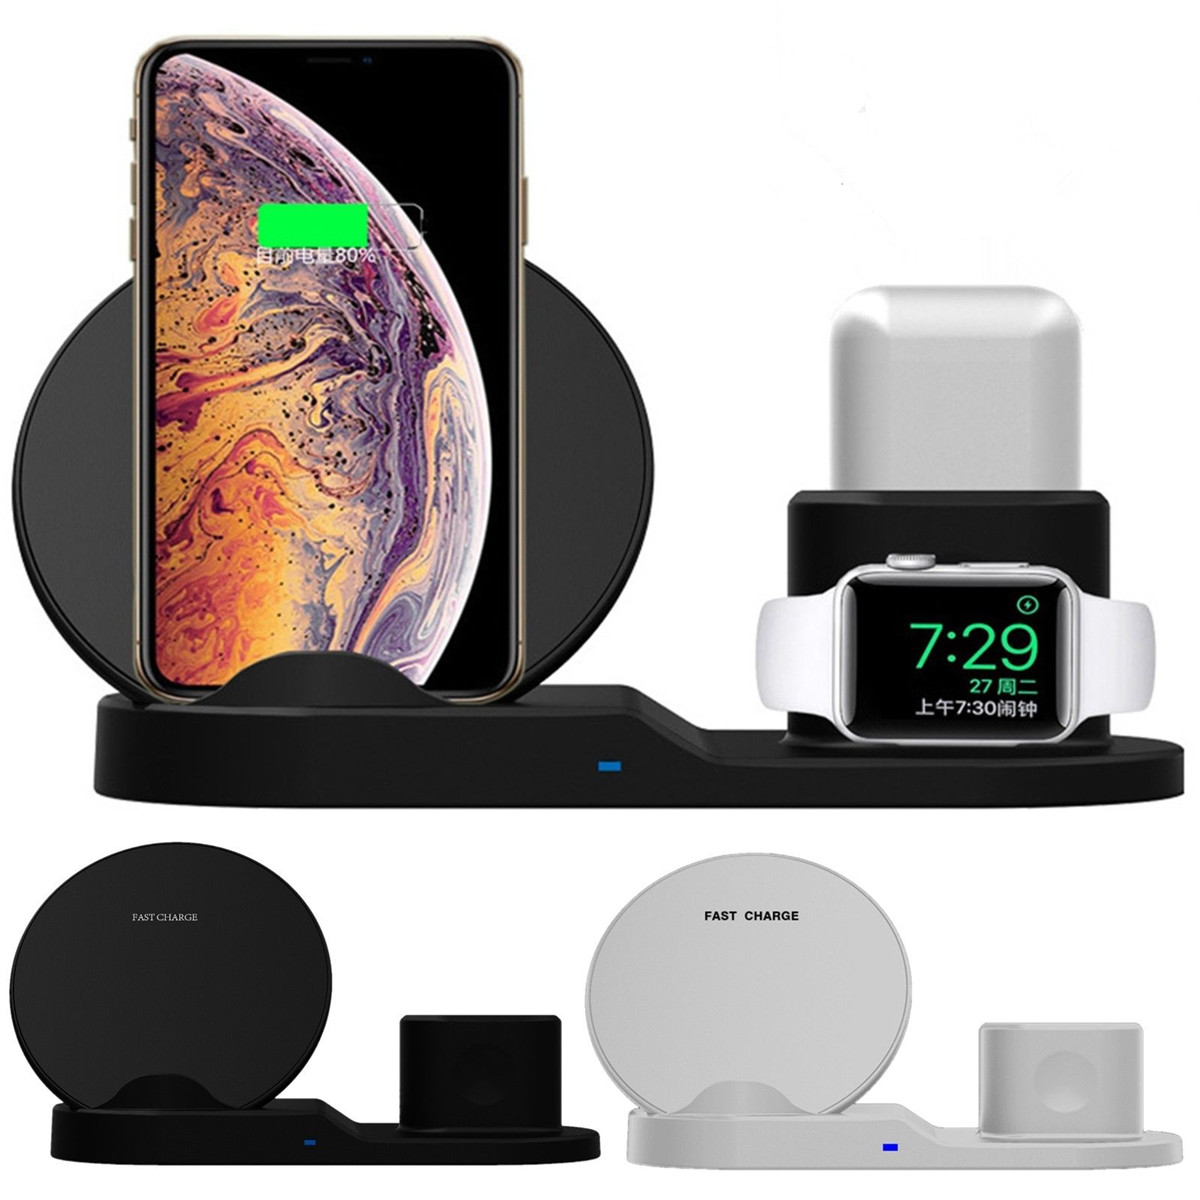 Bakeey 3 in 1 Fast QI Wireless Charger Stand Dock For iPhone 8 X XS Watch iwatch Airpod